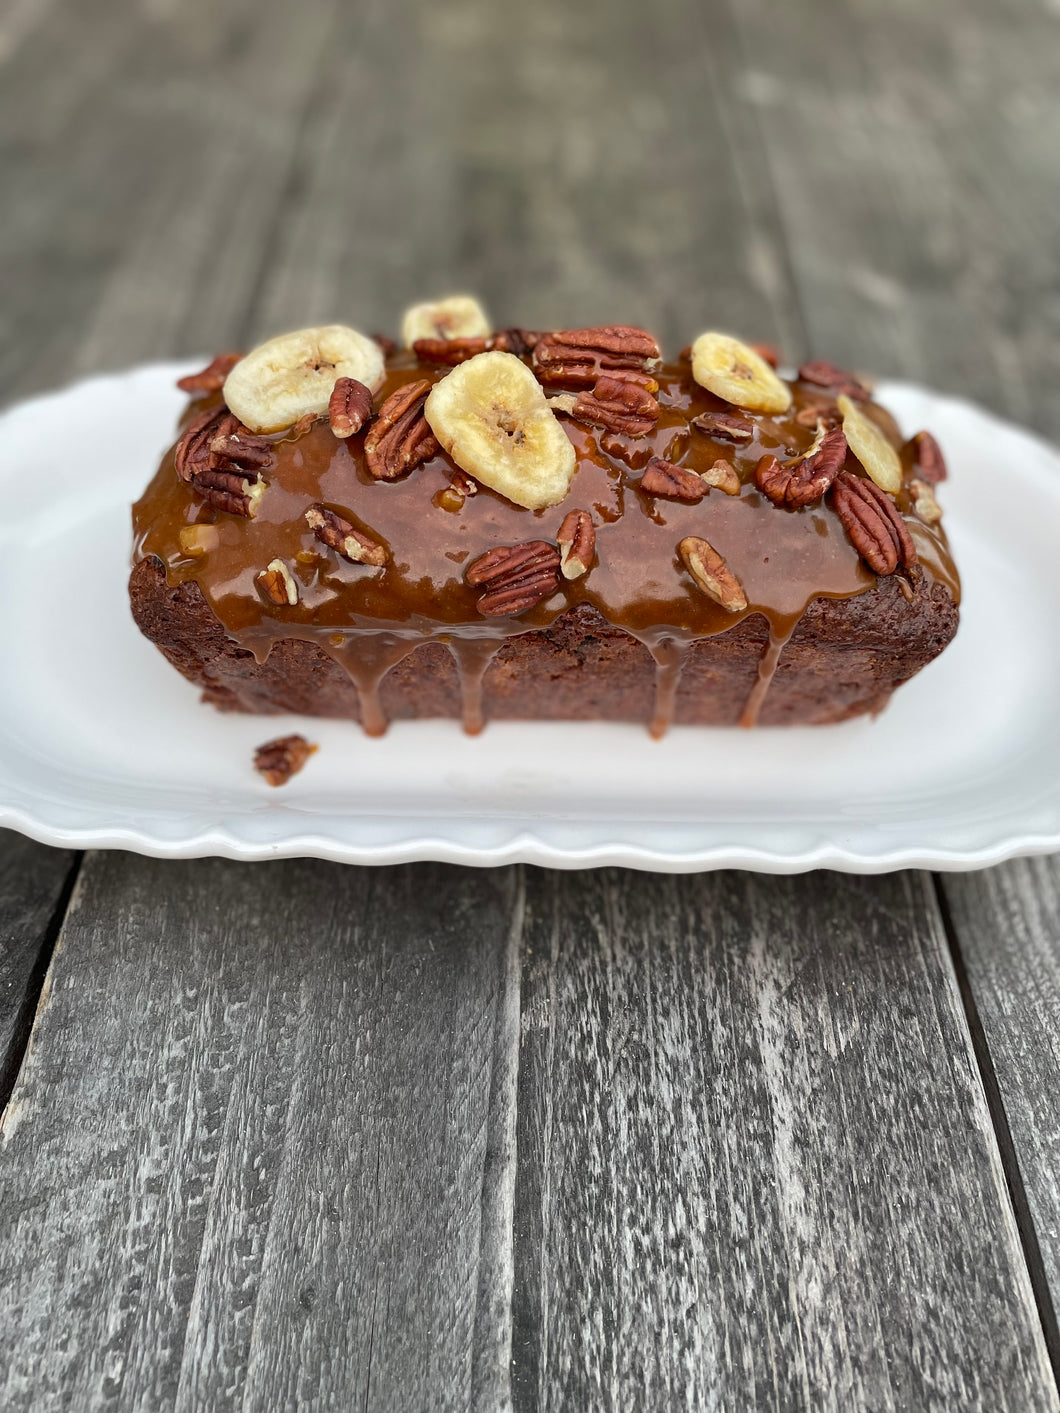 BANOFFEE, DATE, PECAN & TOFFEE SAUCE CAKE - Gluten Free option available